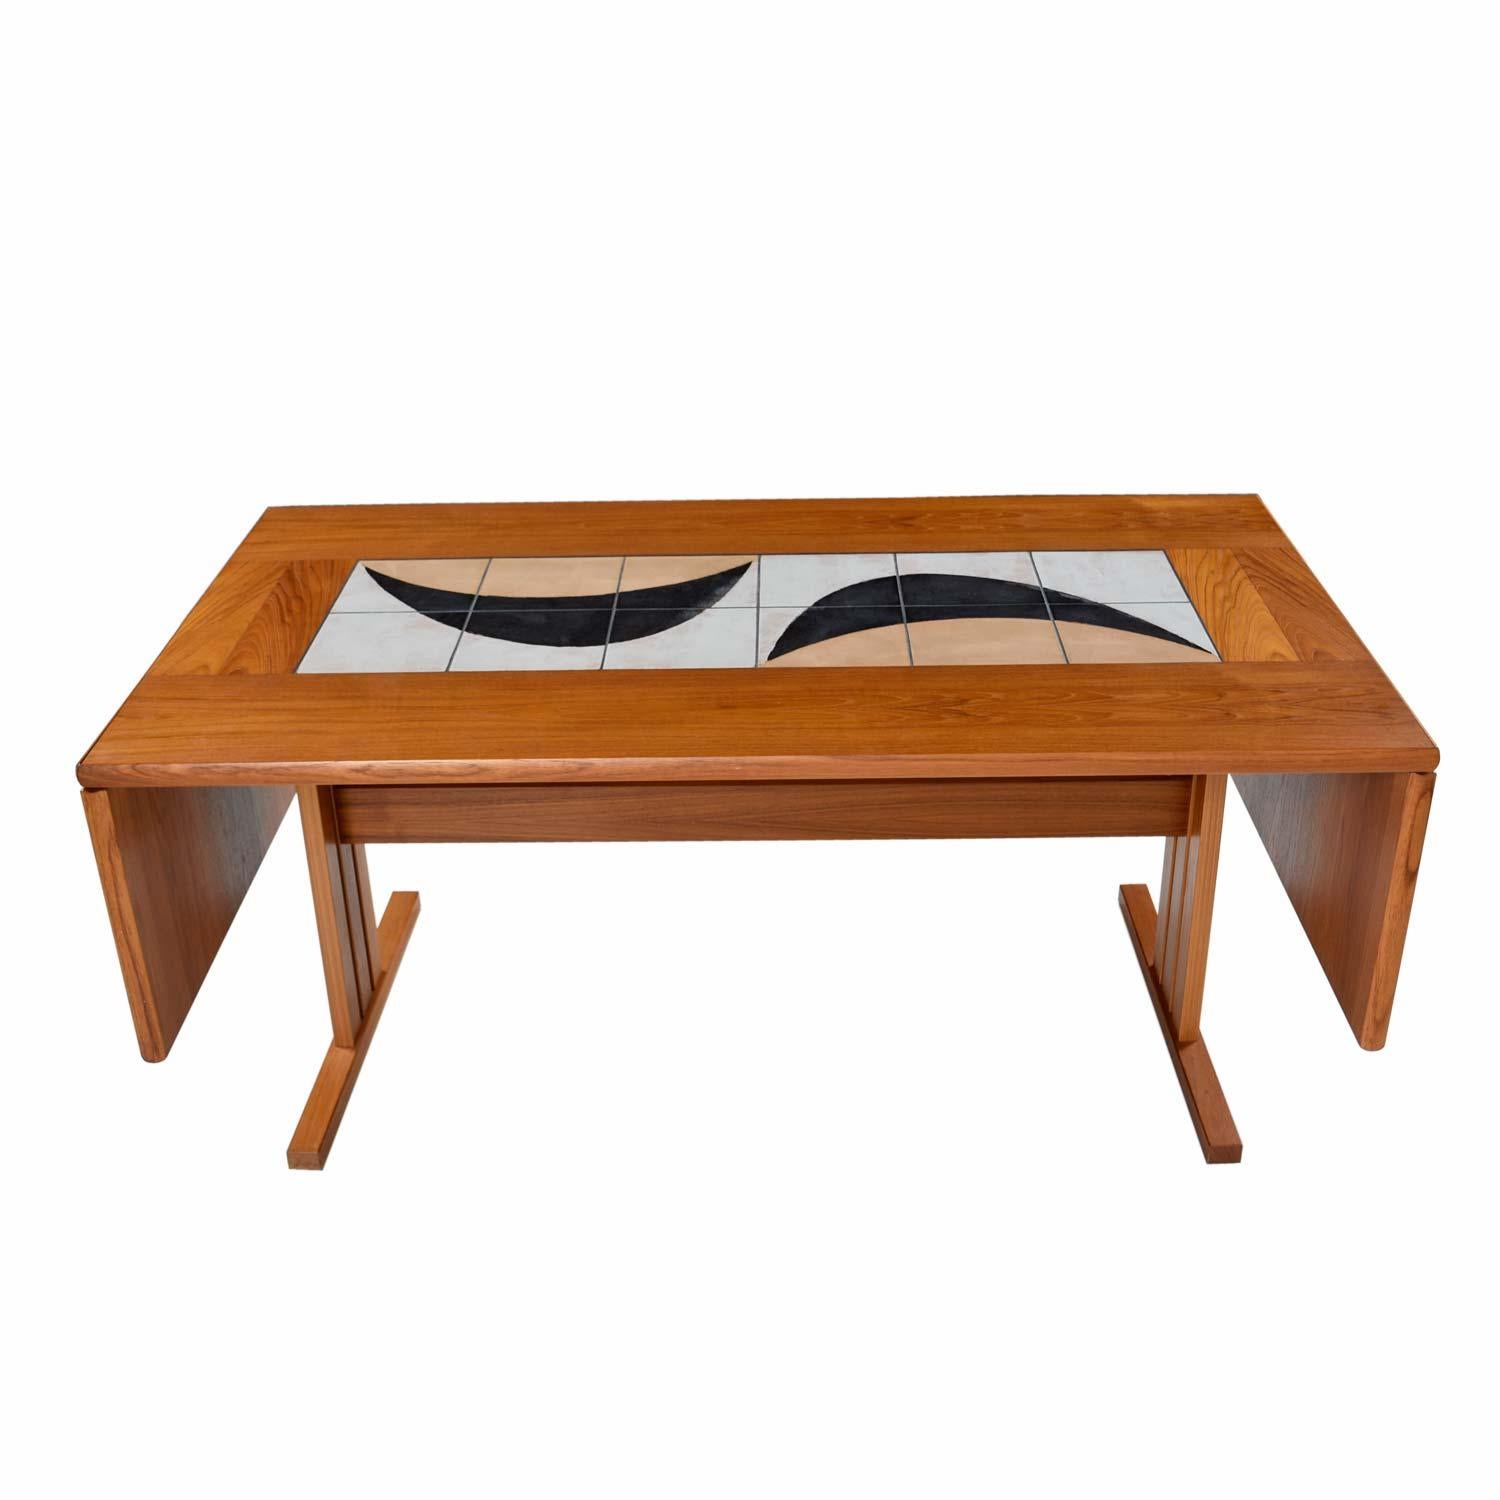 This teak dining table by Gangsø Møbler exudes style with its artful tile motif. The tiles are not purely decorative. They serve a practical purpose. Place hot or wet plates on the tile to prevent damaging your wood surface. The table is a drop leaf